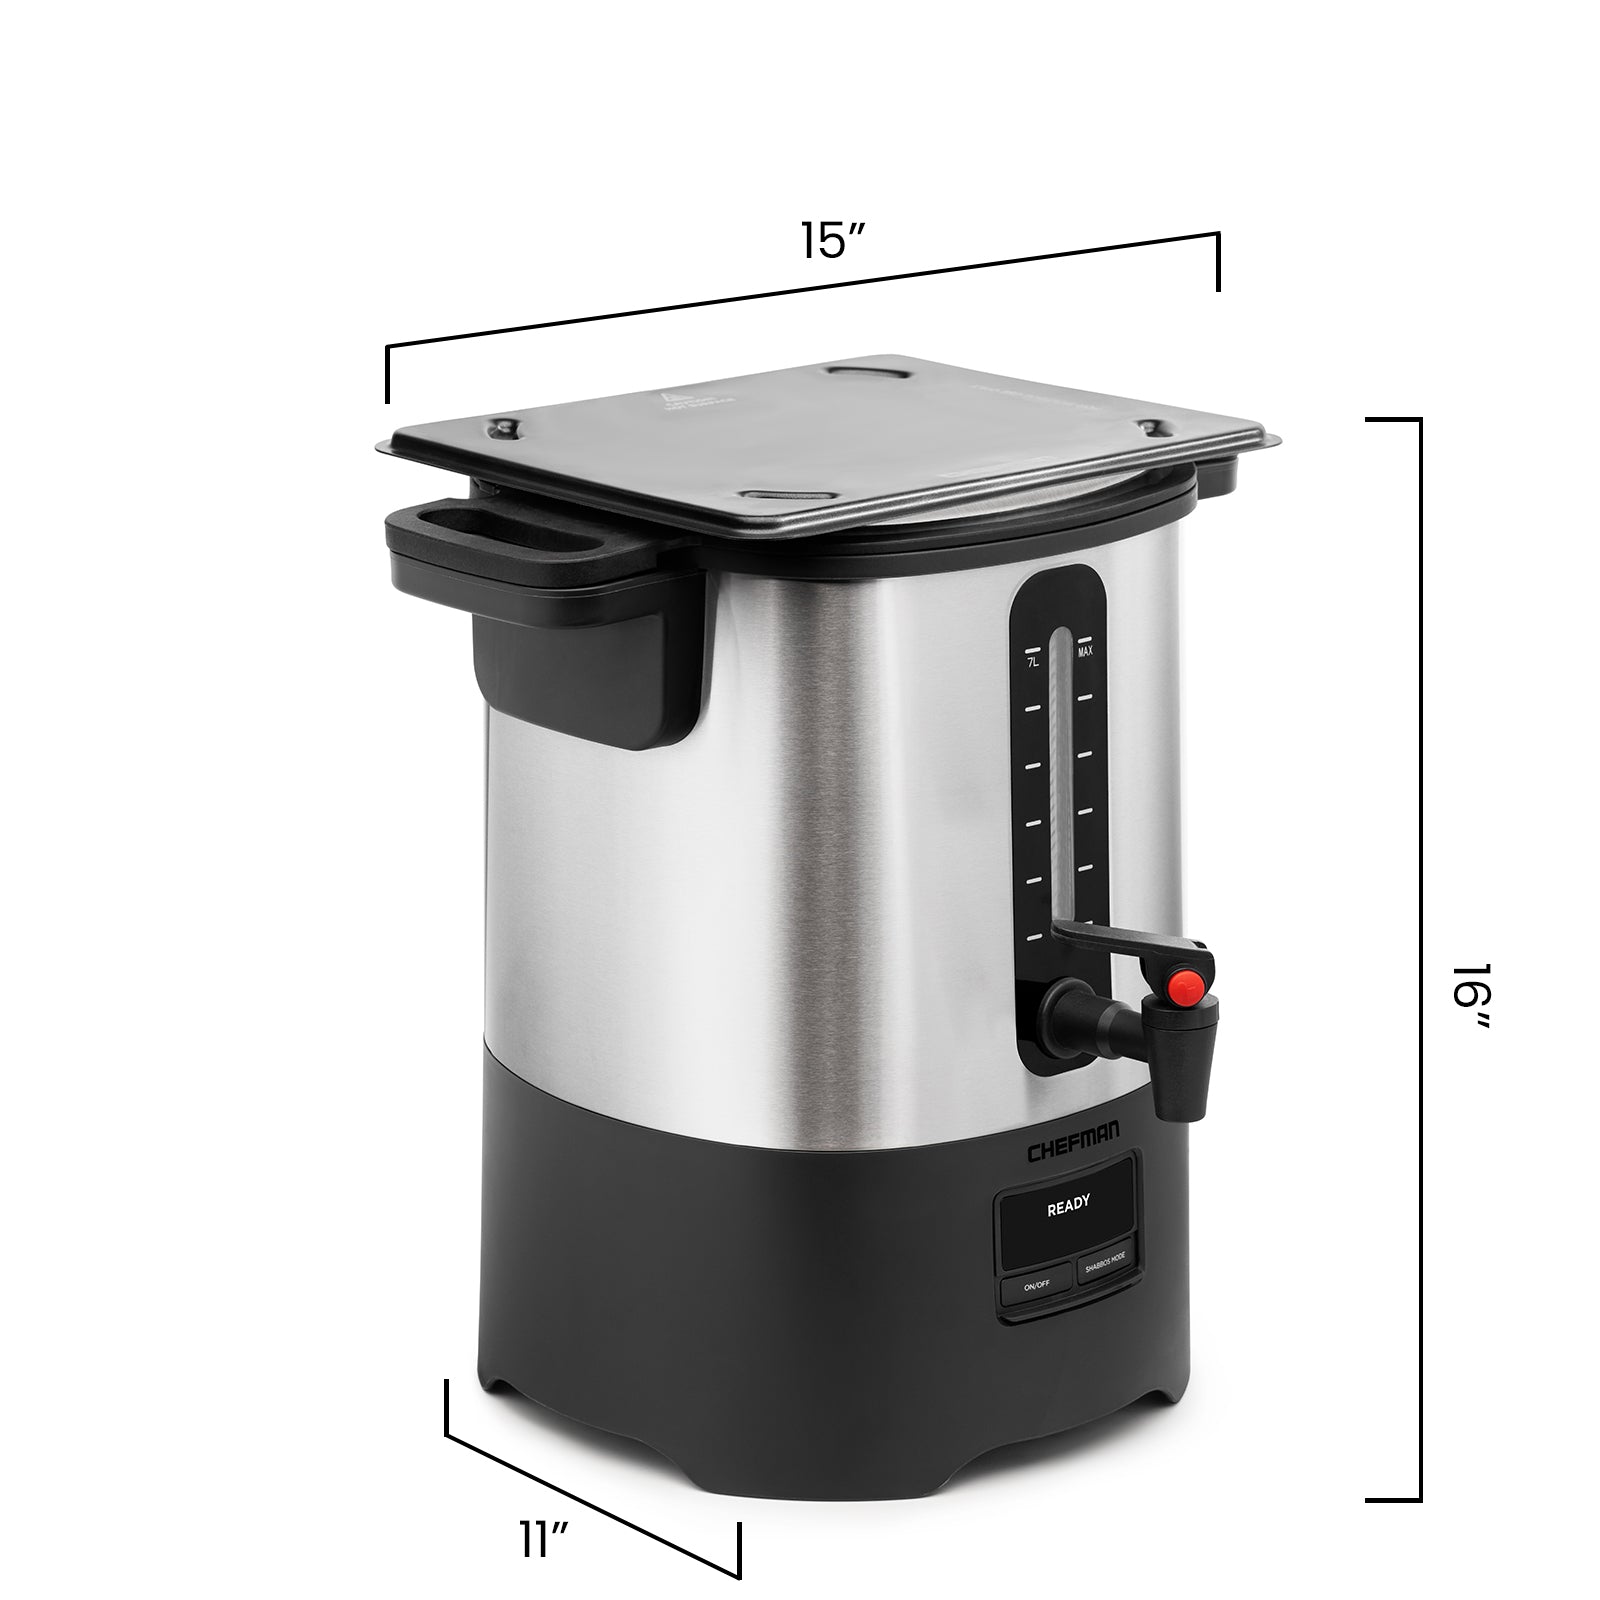 Chefman Electric Hot Water Pot Urn with Safety Lock, Stainless